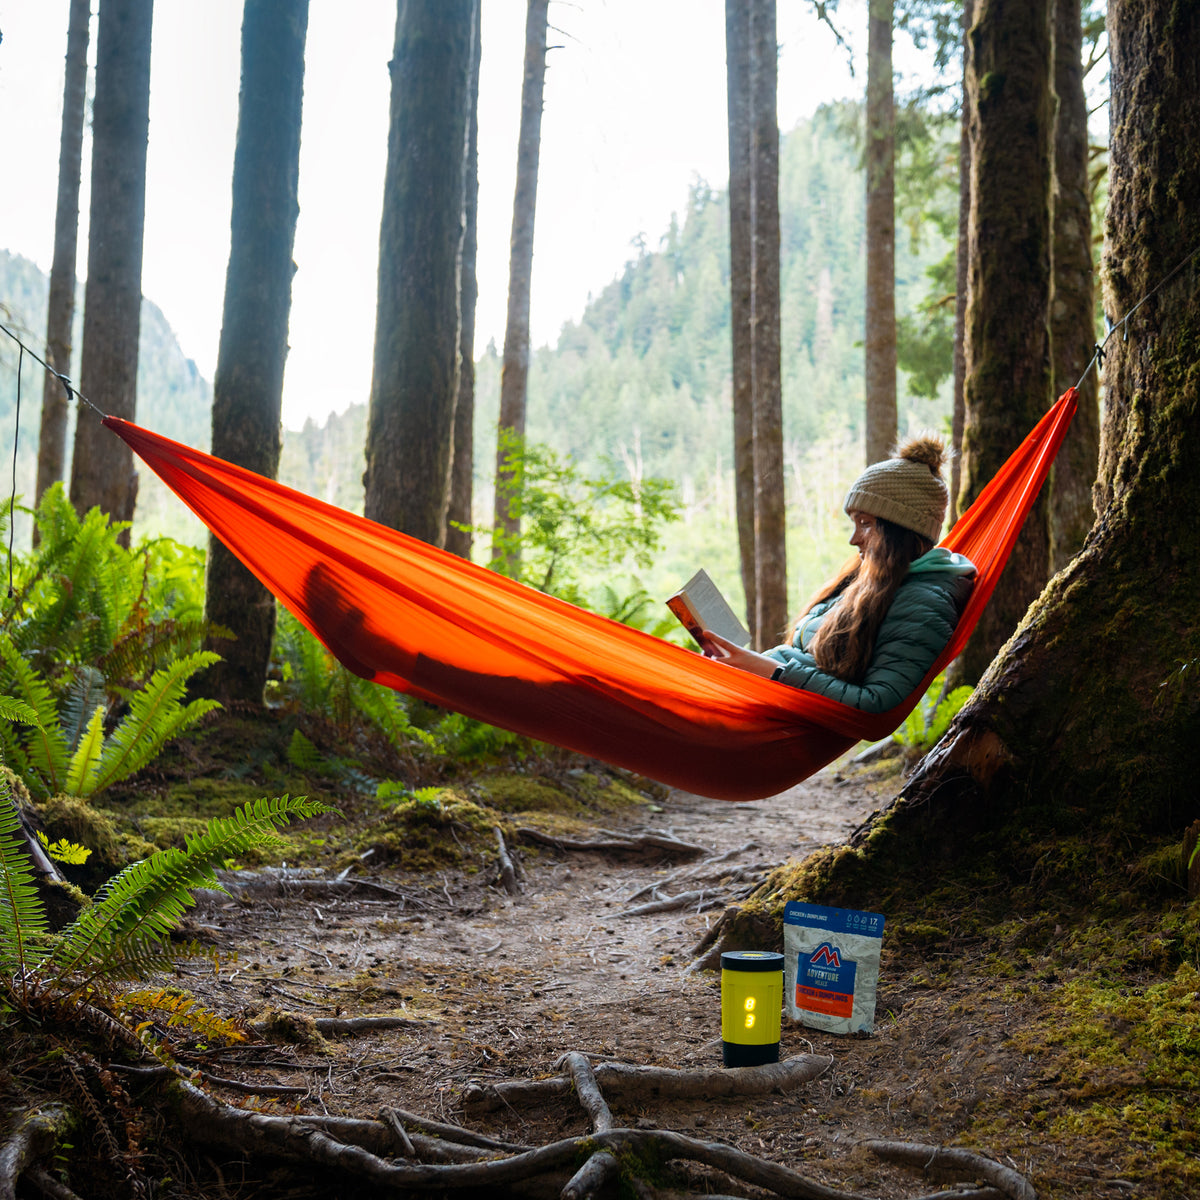 Woman reading in hammock in woods while electric camping stove cooks dinner